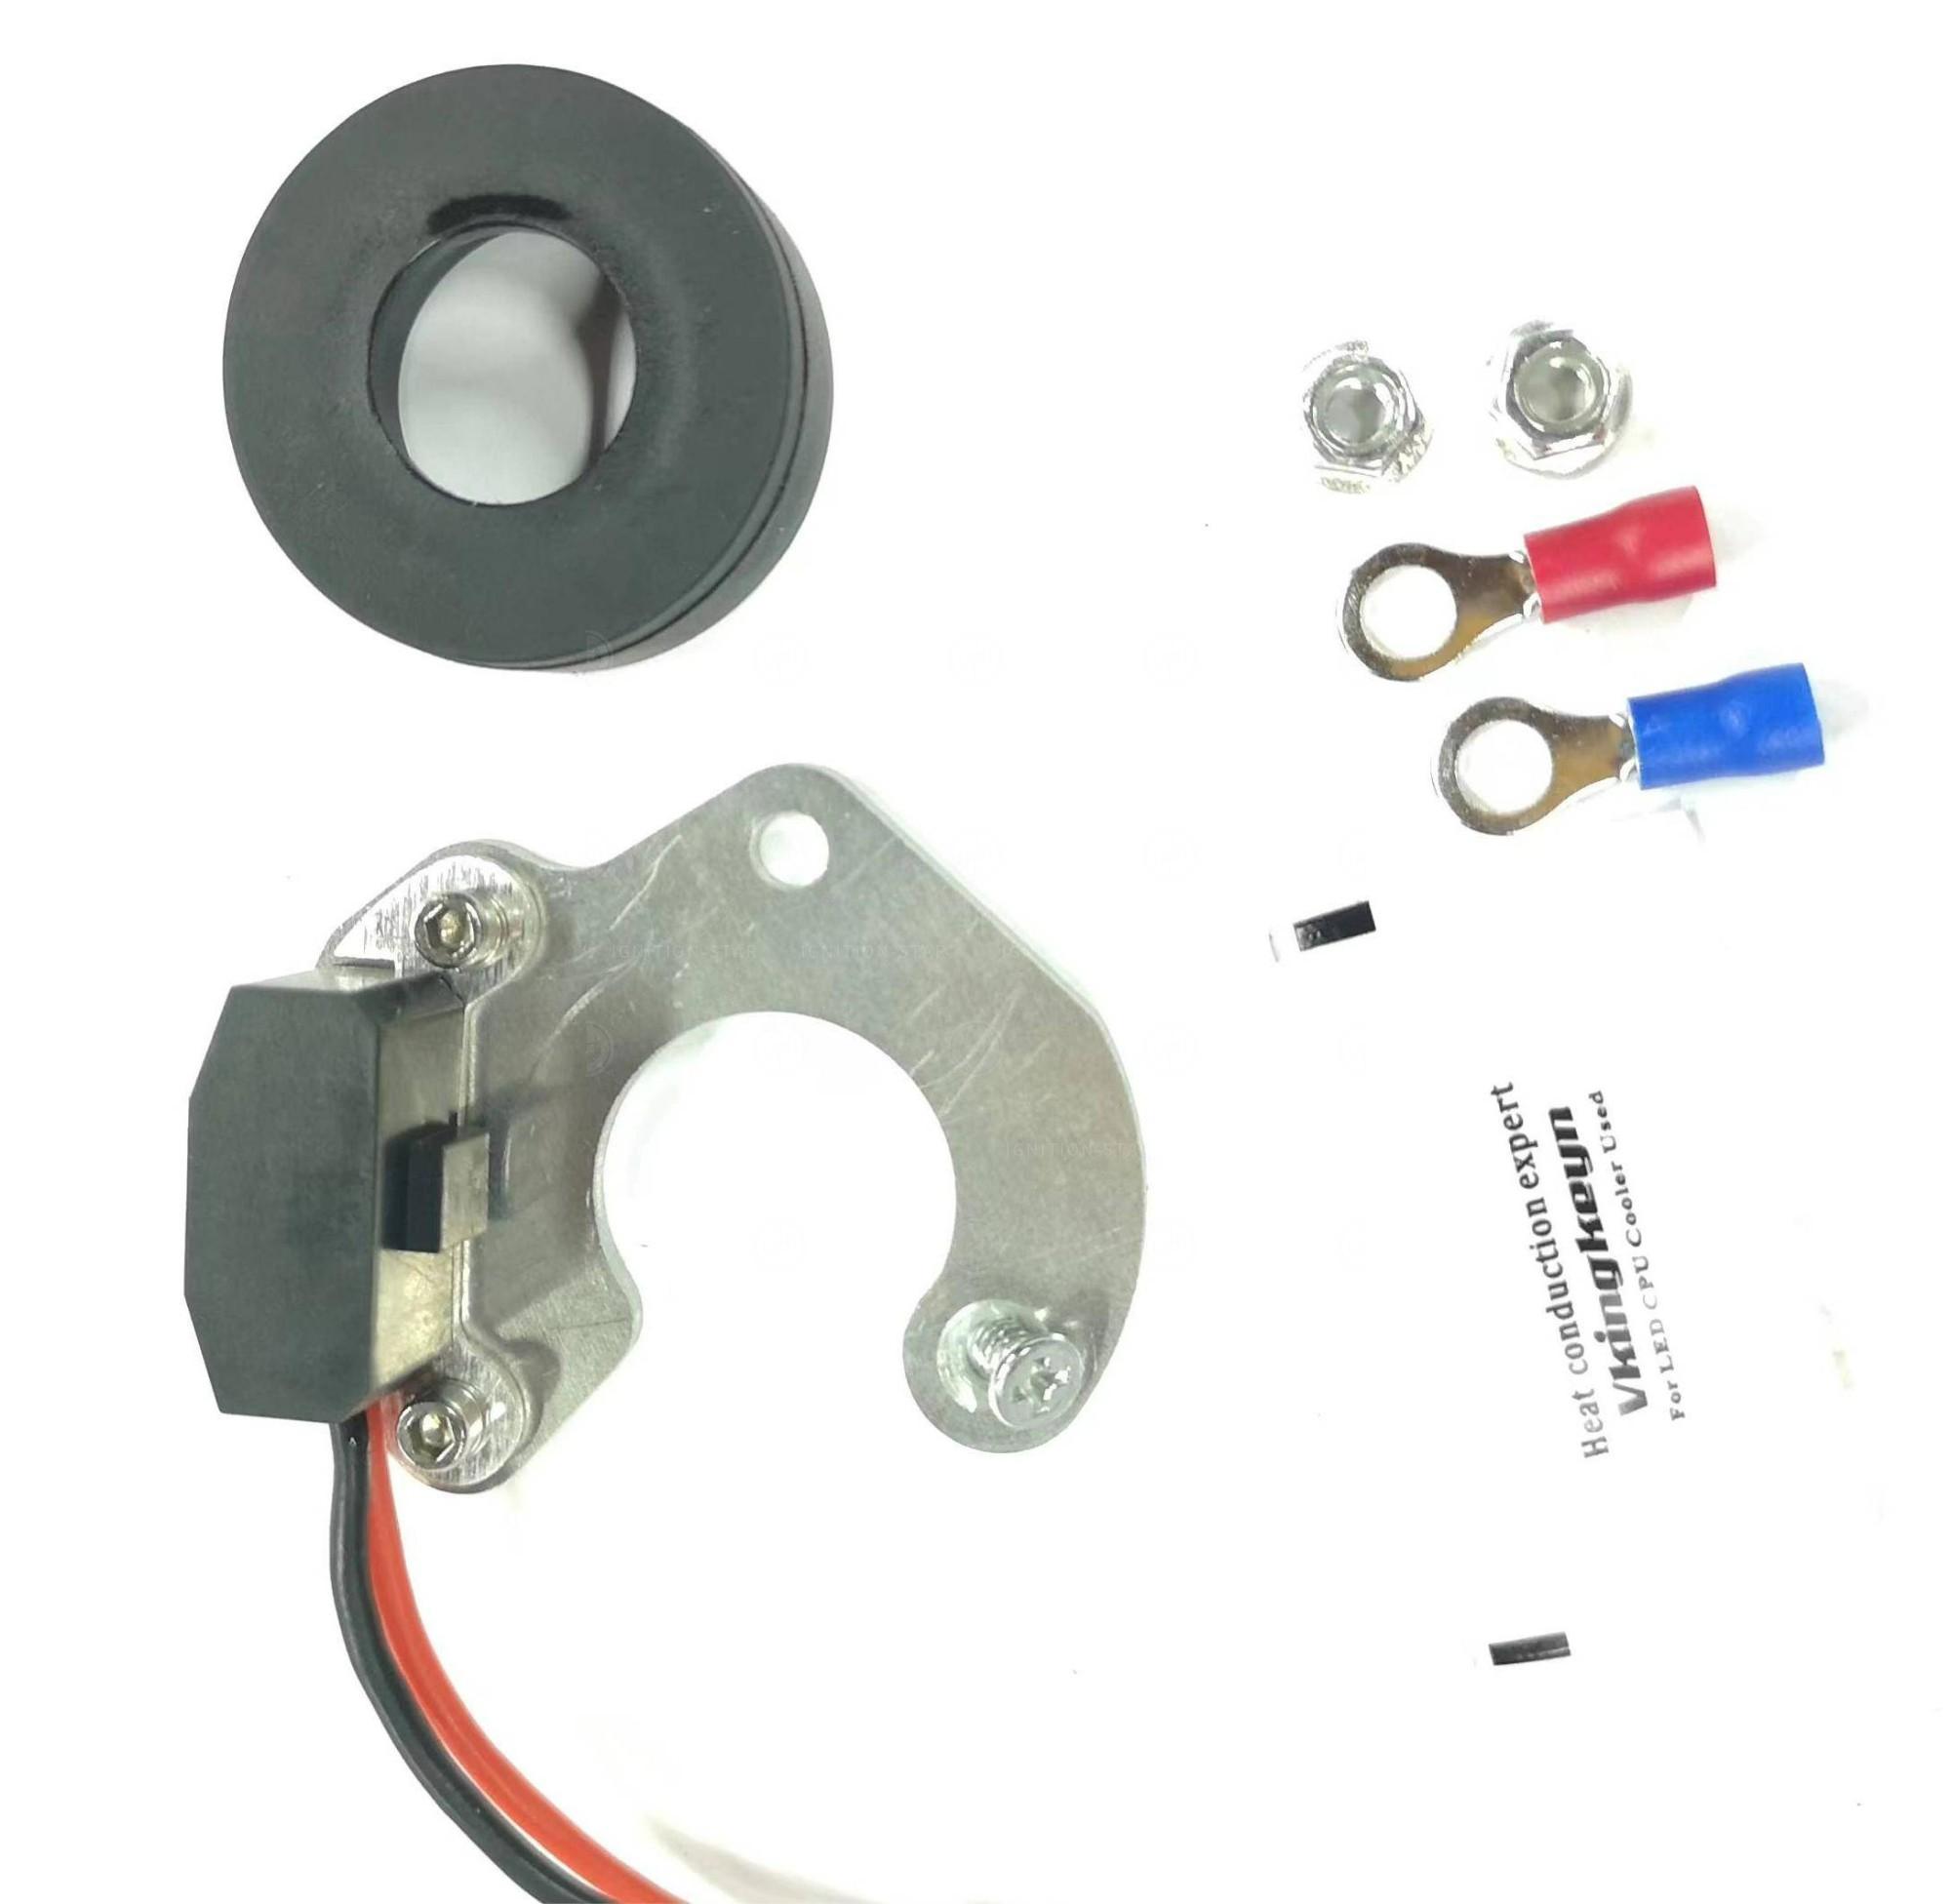 JEEP WILLYS ELETRIC IGNITION KIT